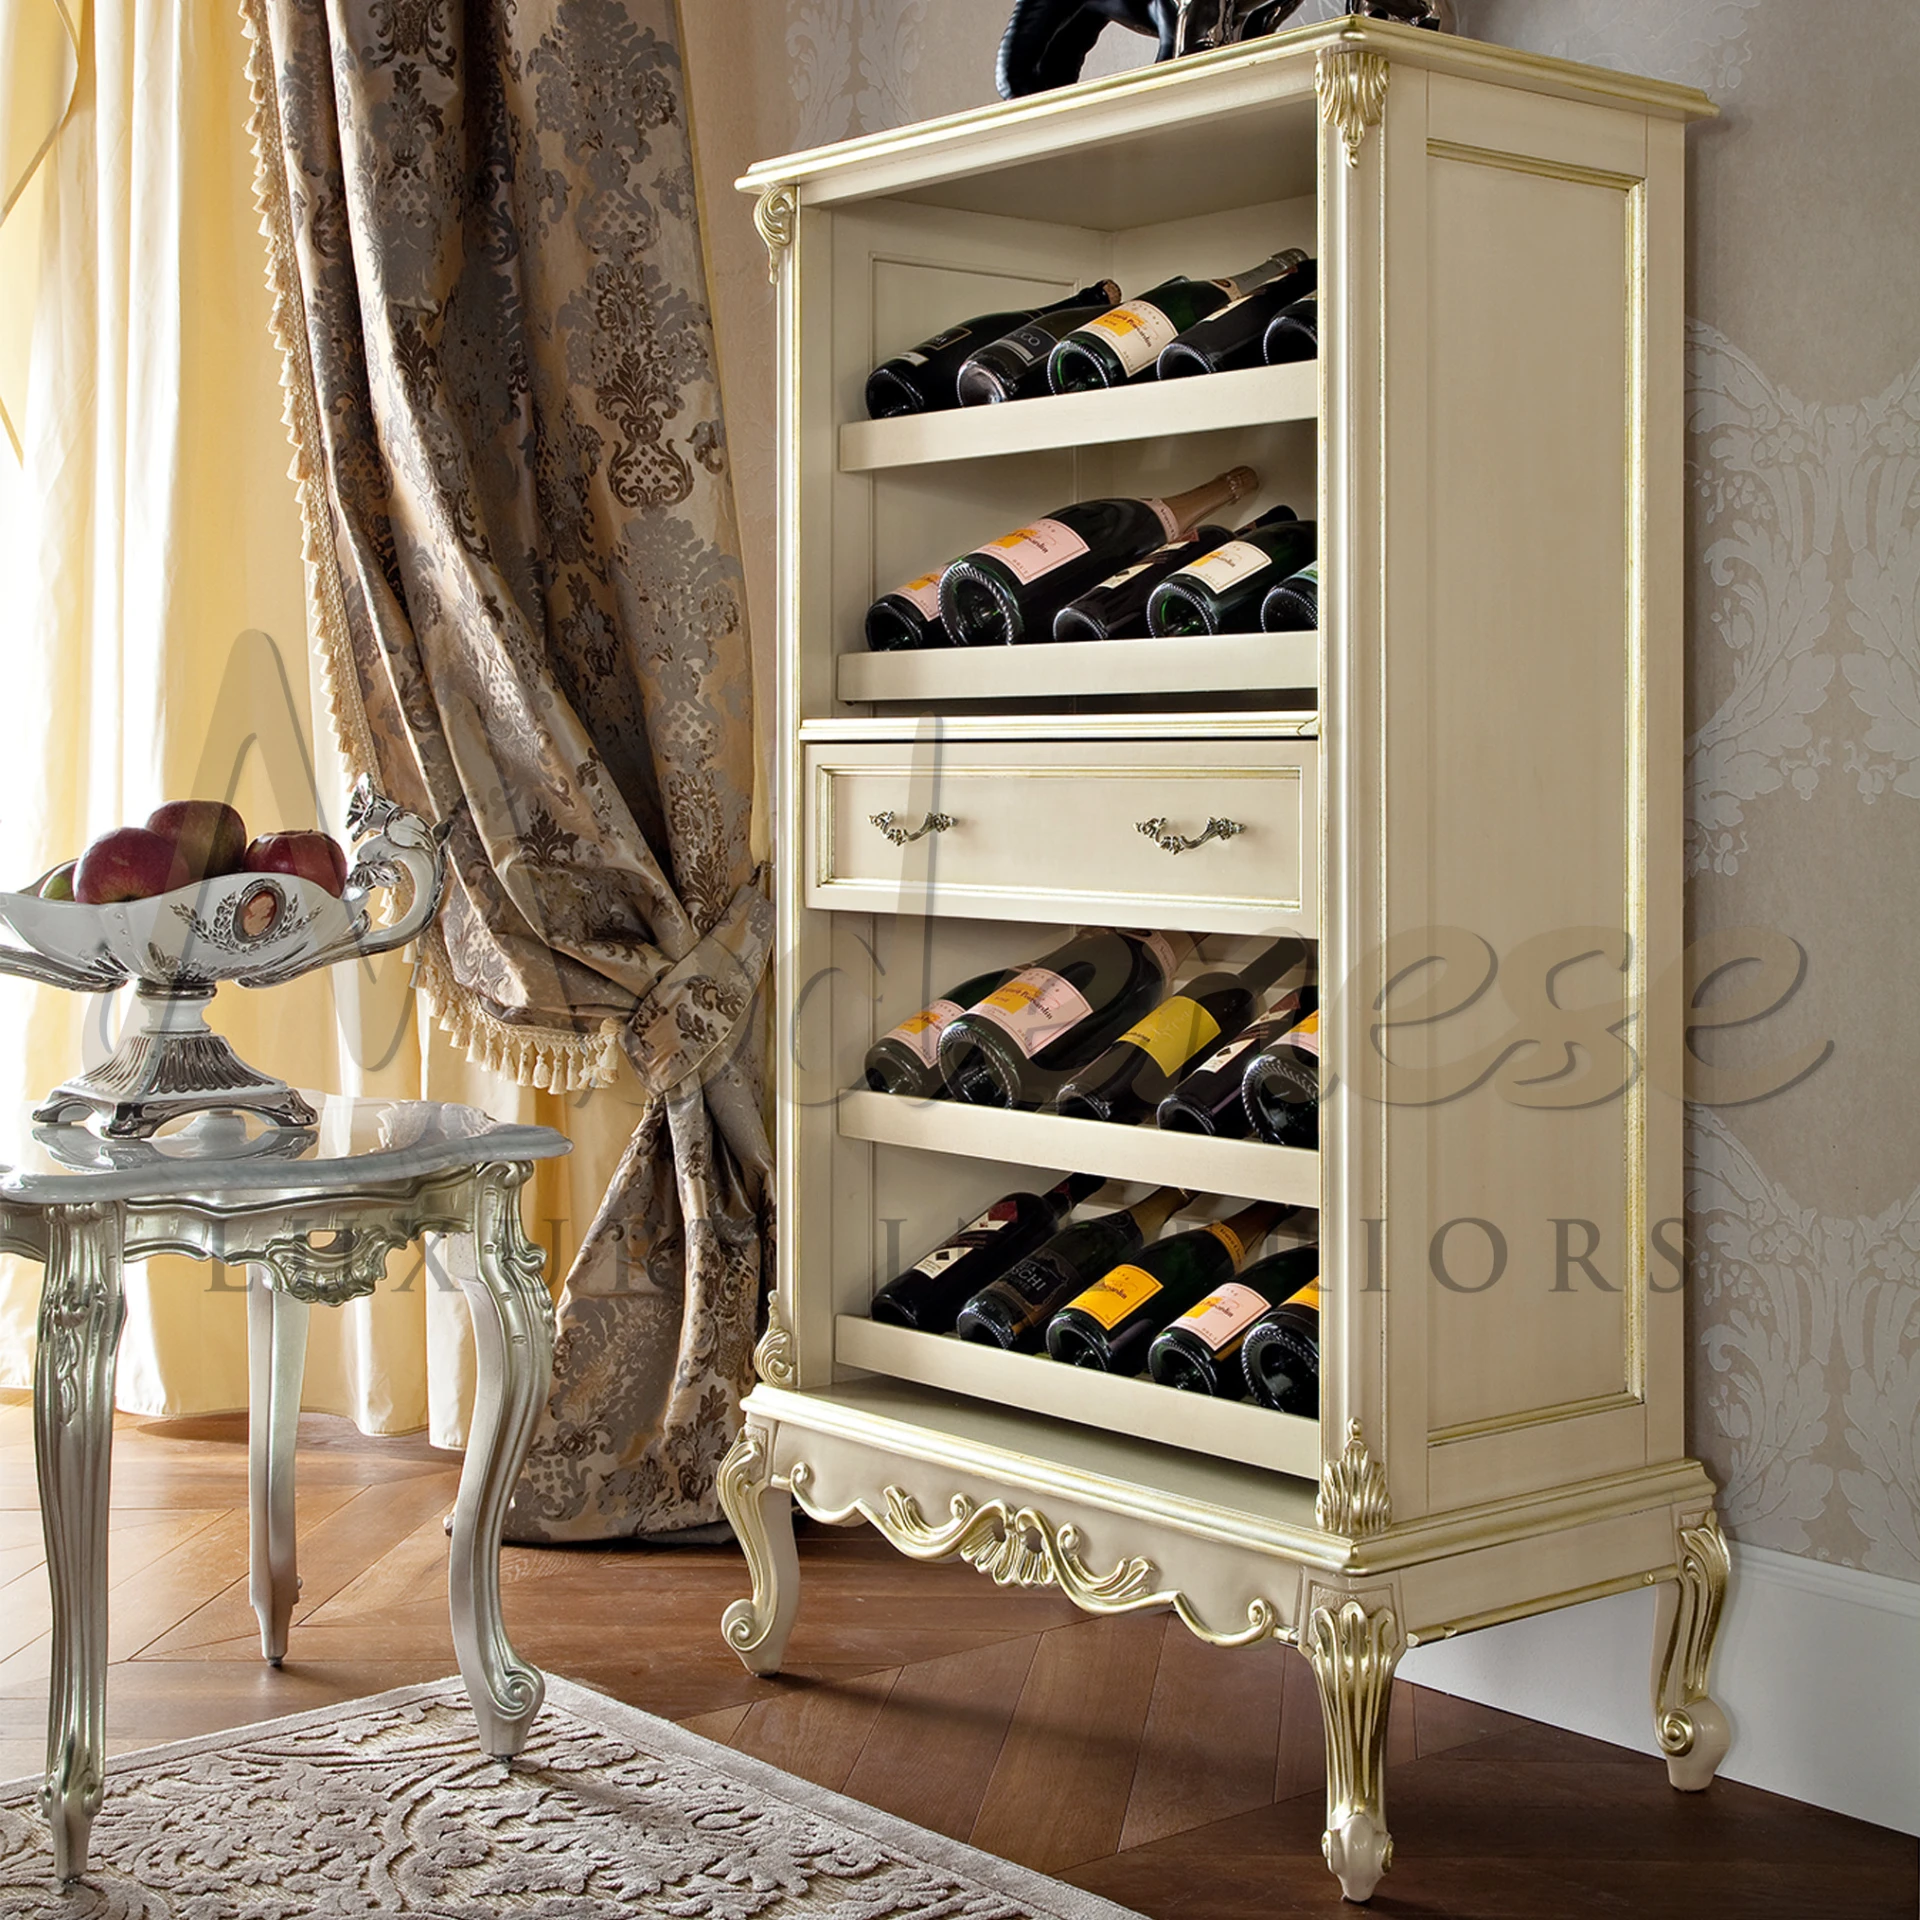 Organize your wine collection in style with this sophisticated bottle rack, crafted from sturdy wood and adorned with ivory lacquer and golden leaf embellishments.